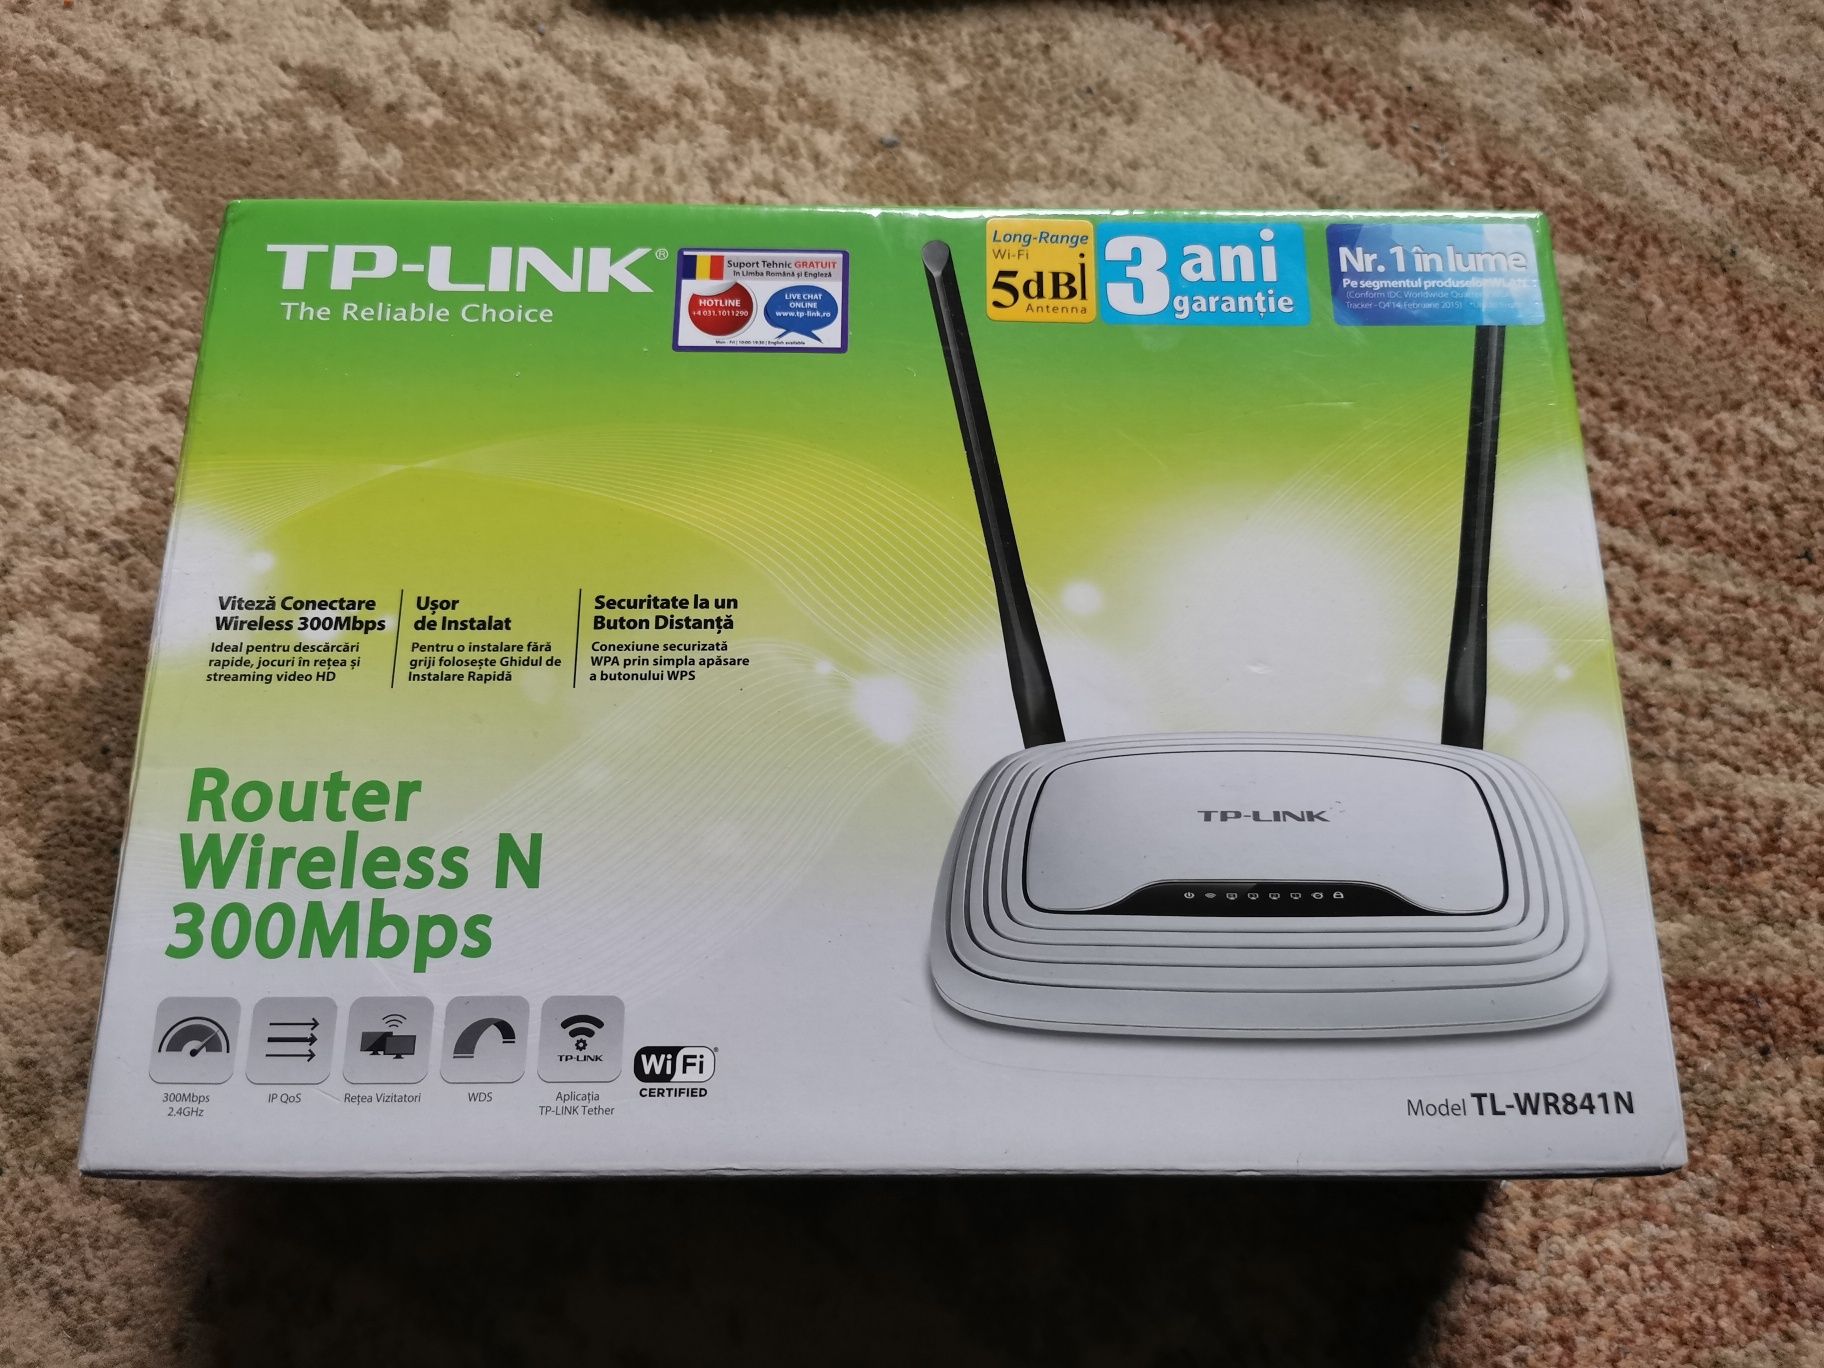 One sentence competition Skylight Router TP-LINK TL-WR841N Craiova • OLX.ro